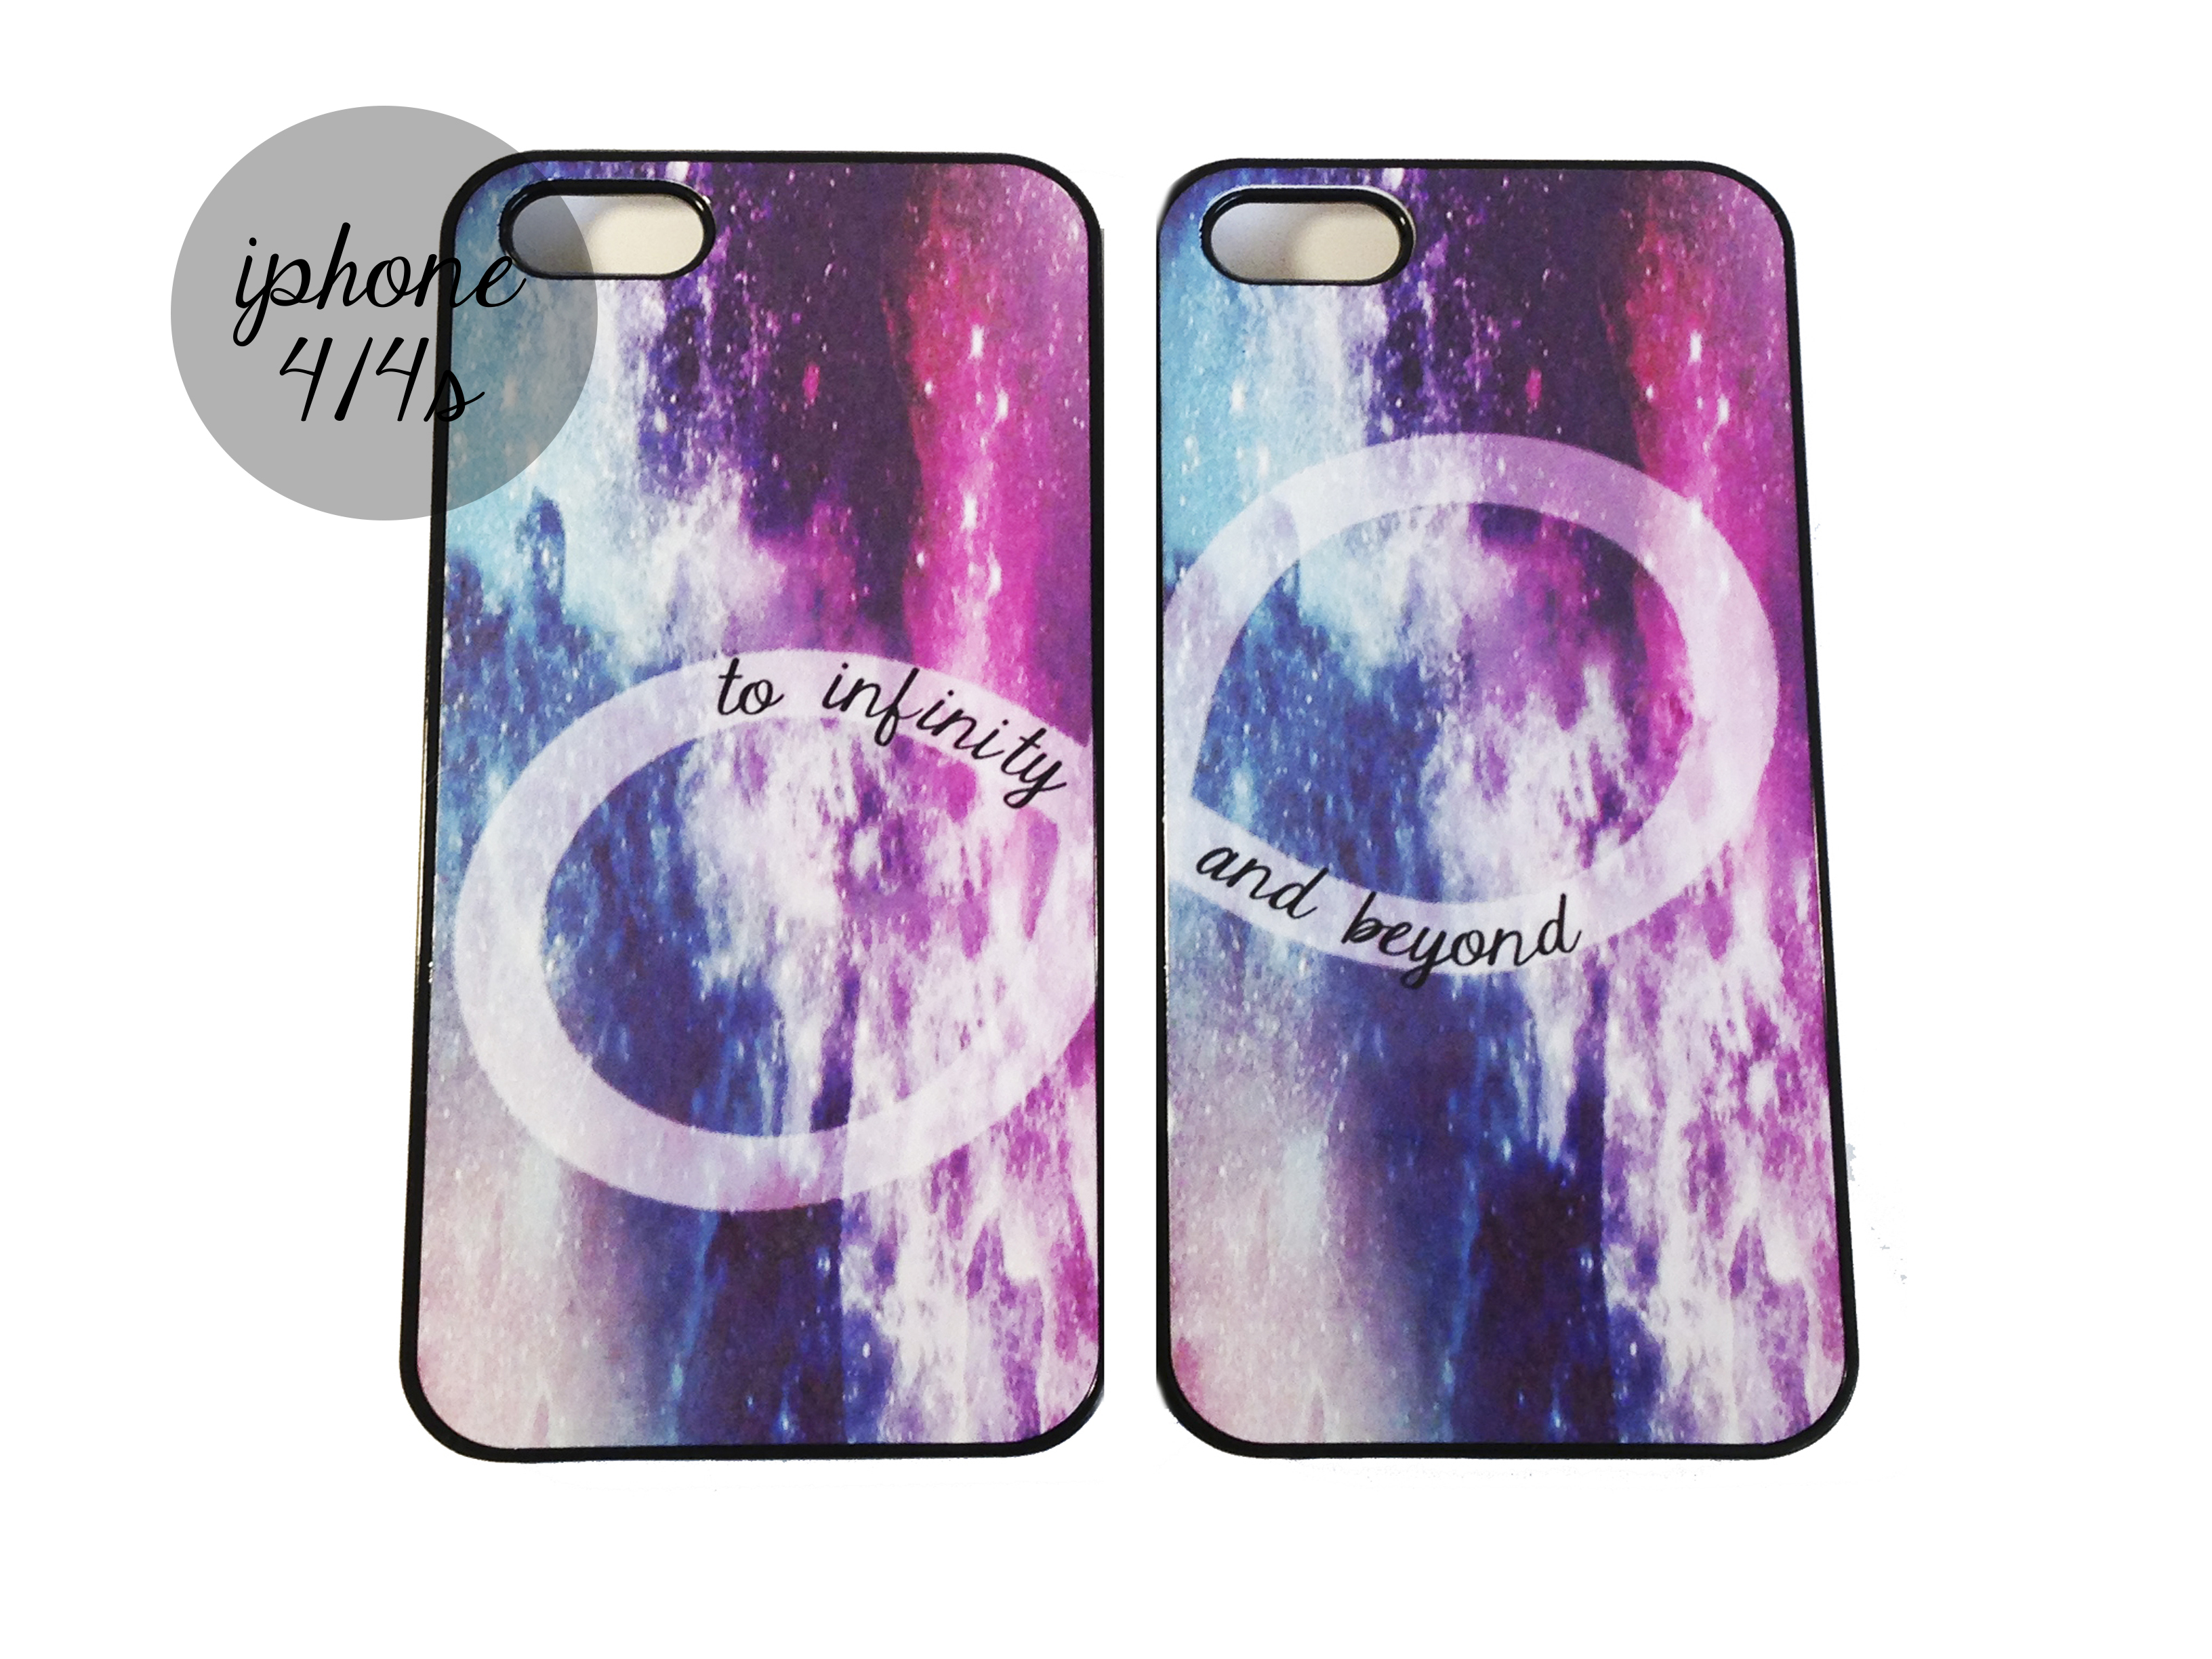 Best Friends iPhone Cases Galaxy To Infinity An Beyond F By